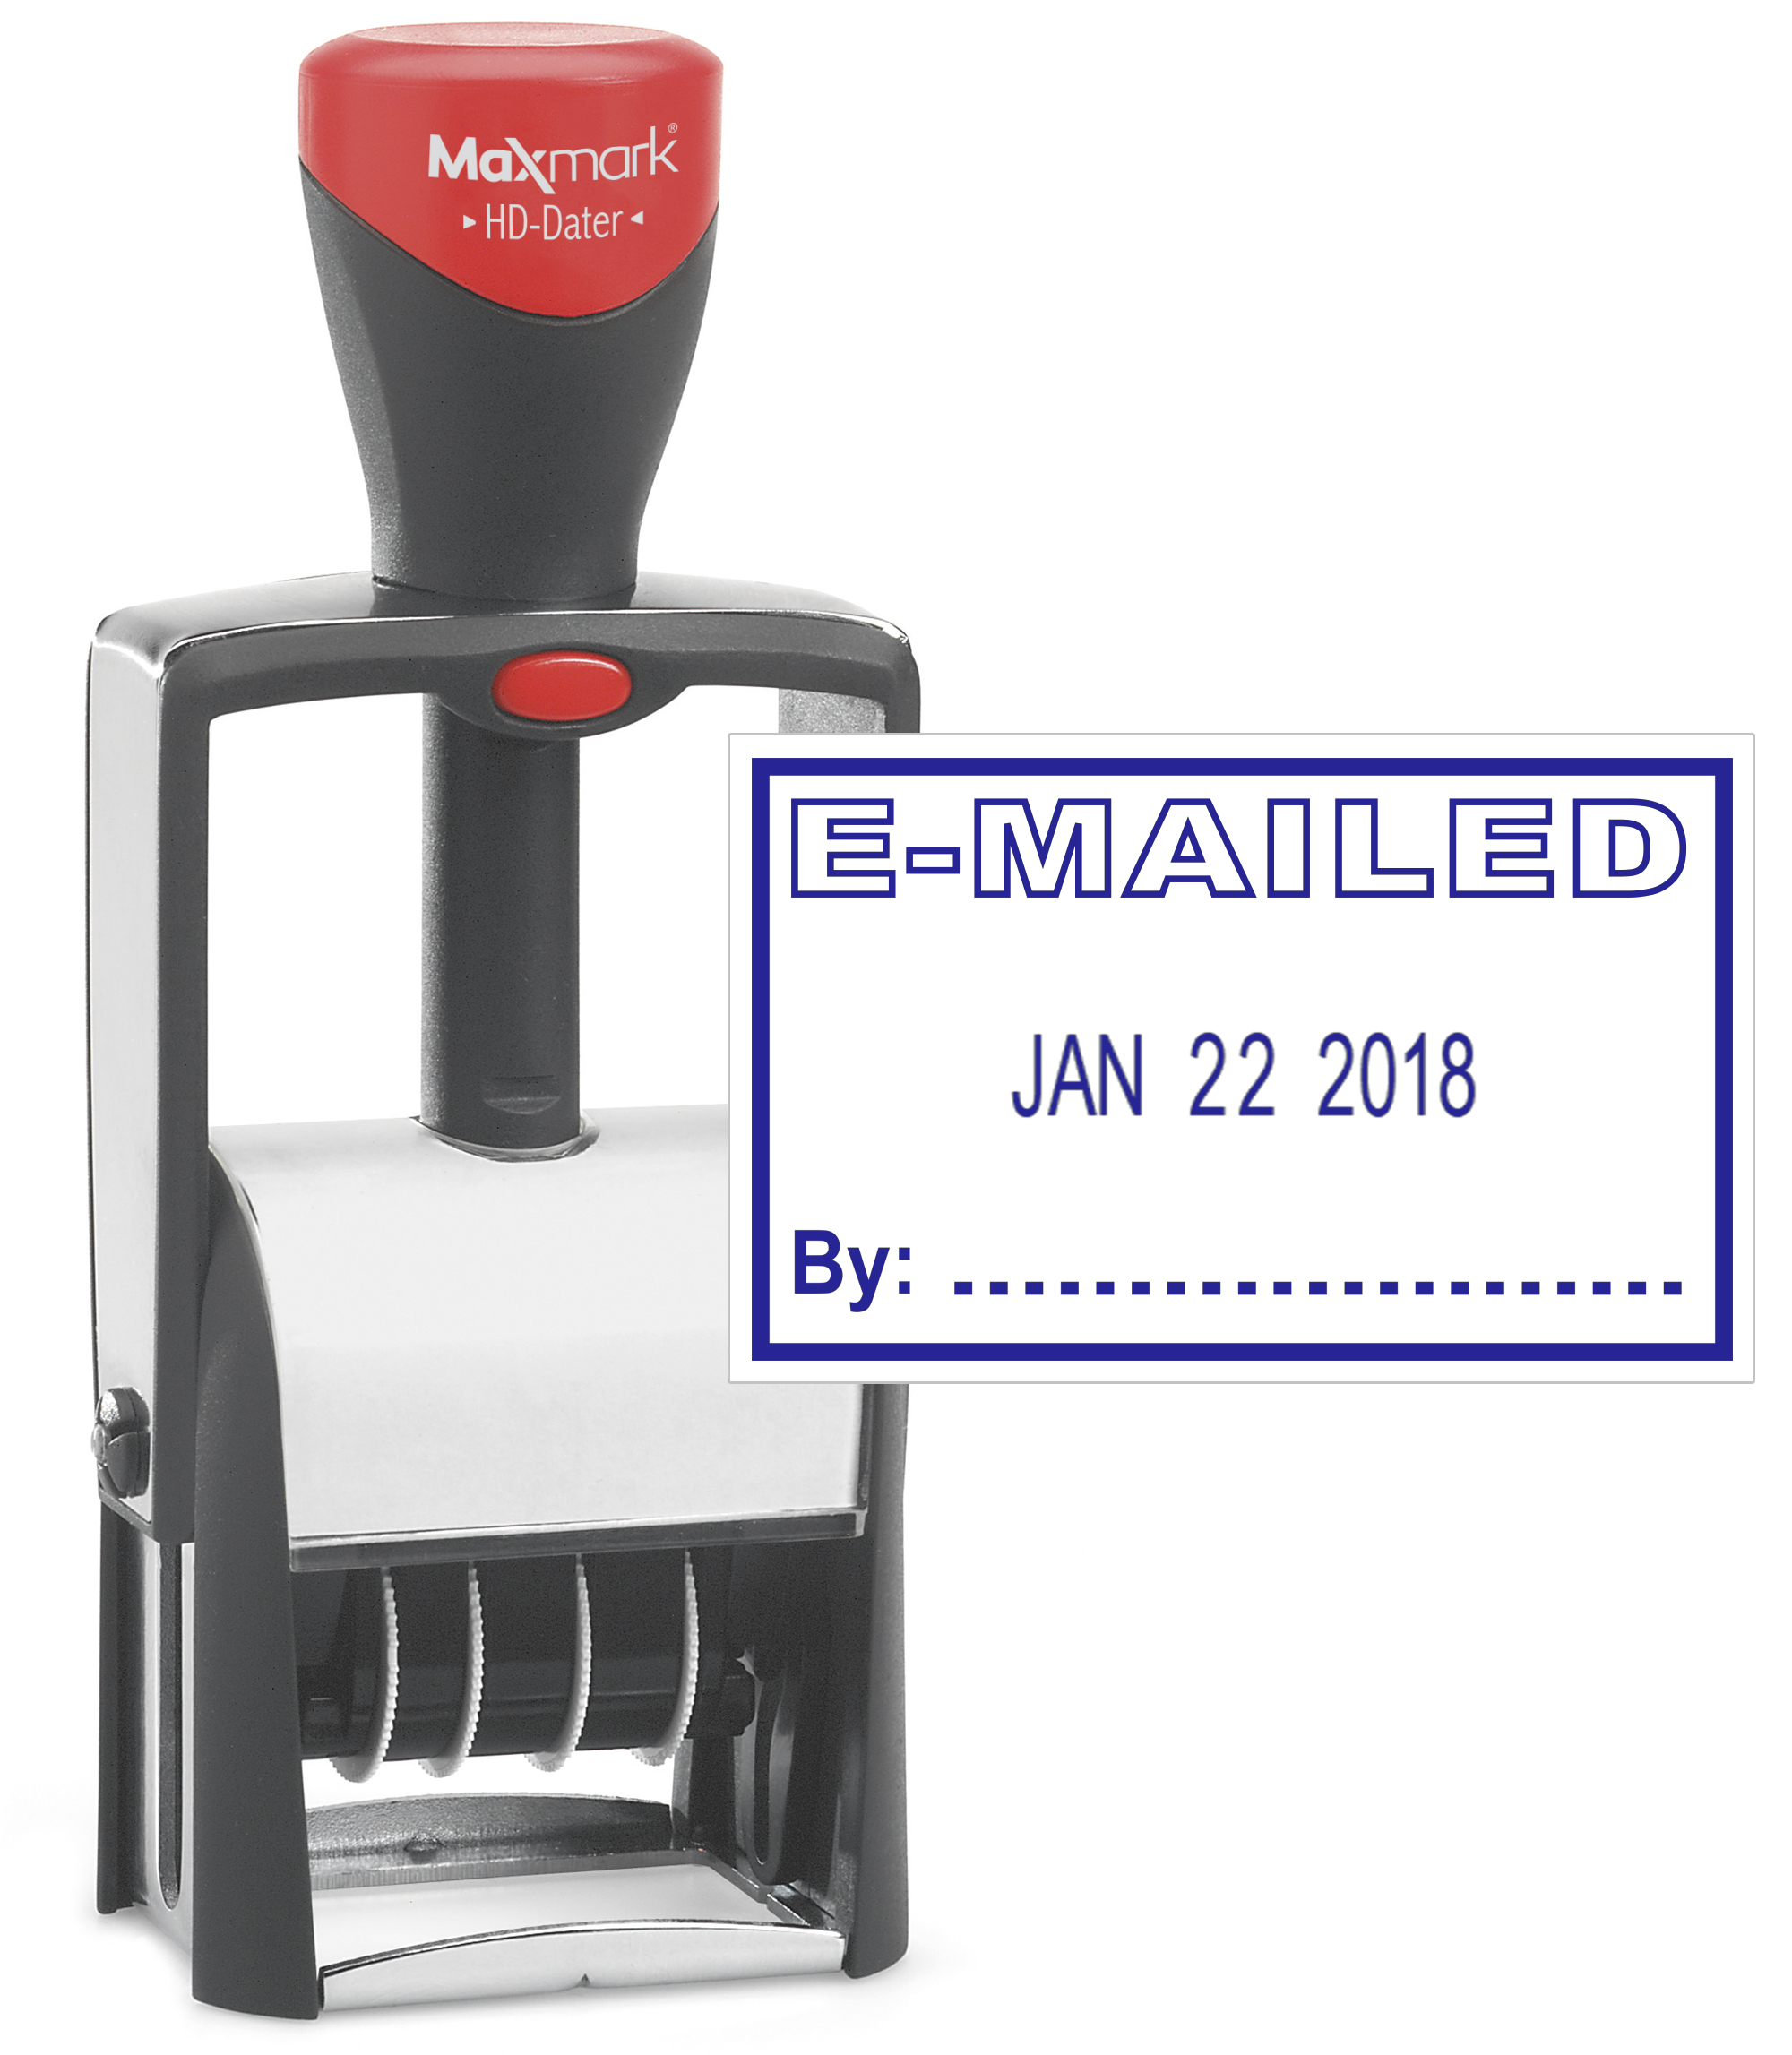 Heavy Duty Date Stamp with "EMAILED" Self Inking Stamp - BLUE Ink